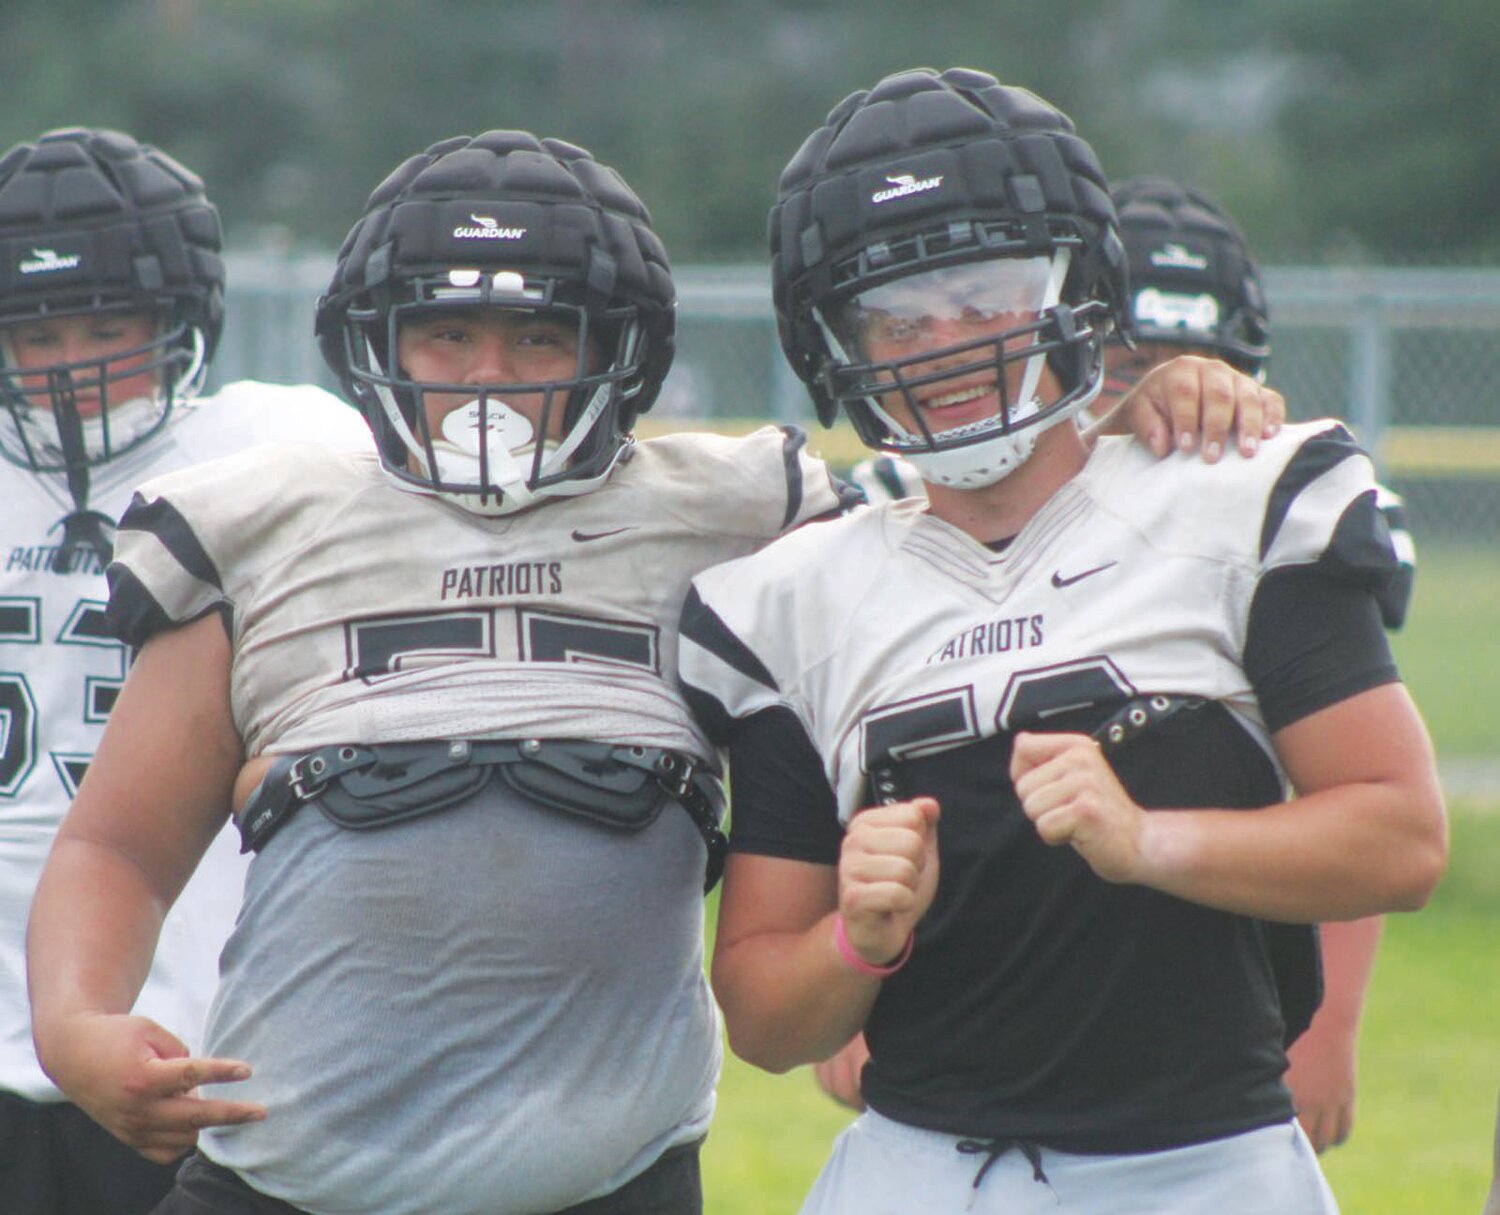 READY FOR KICKOFF: Pilgrim’s Isaac Iannone and Nicholas Pirraglia at practice. (Photos by Alex Sponseller)